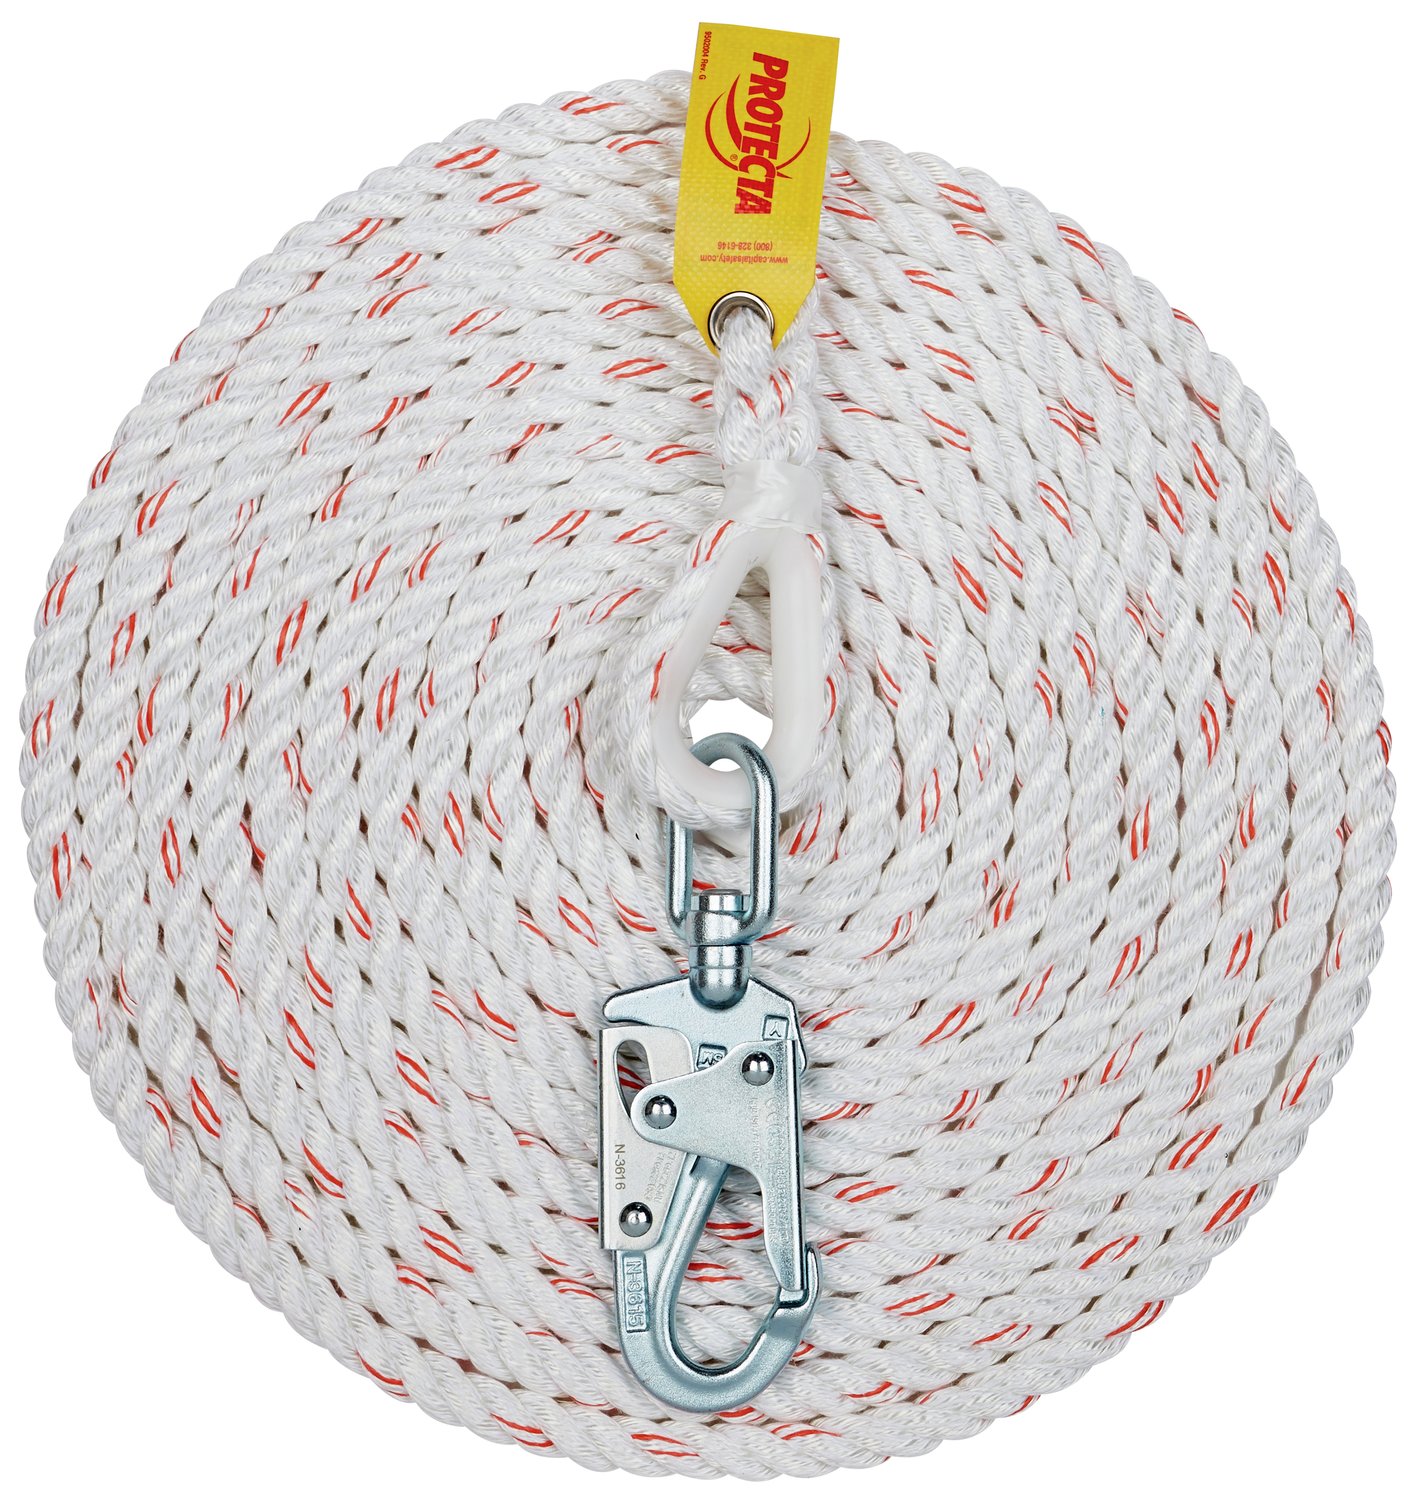 7012817332 - 3M Protecta Rope Lifeline with Swivel Snap Hook 1299997, 5/8 in Polyester and Polypropylene Blend, White, 50 ft